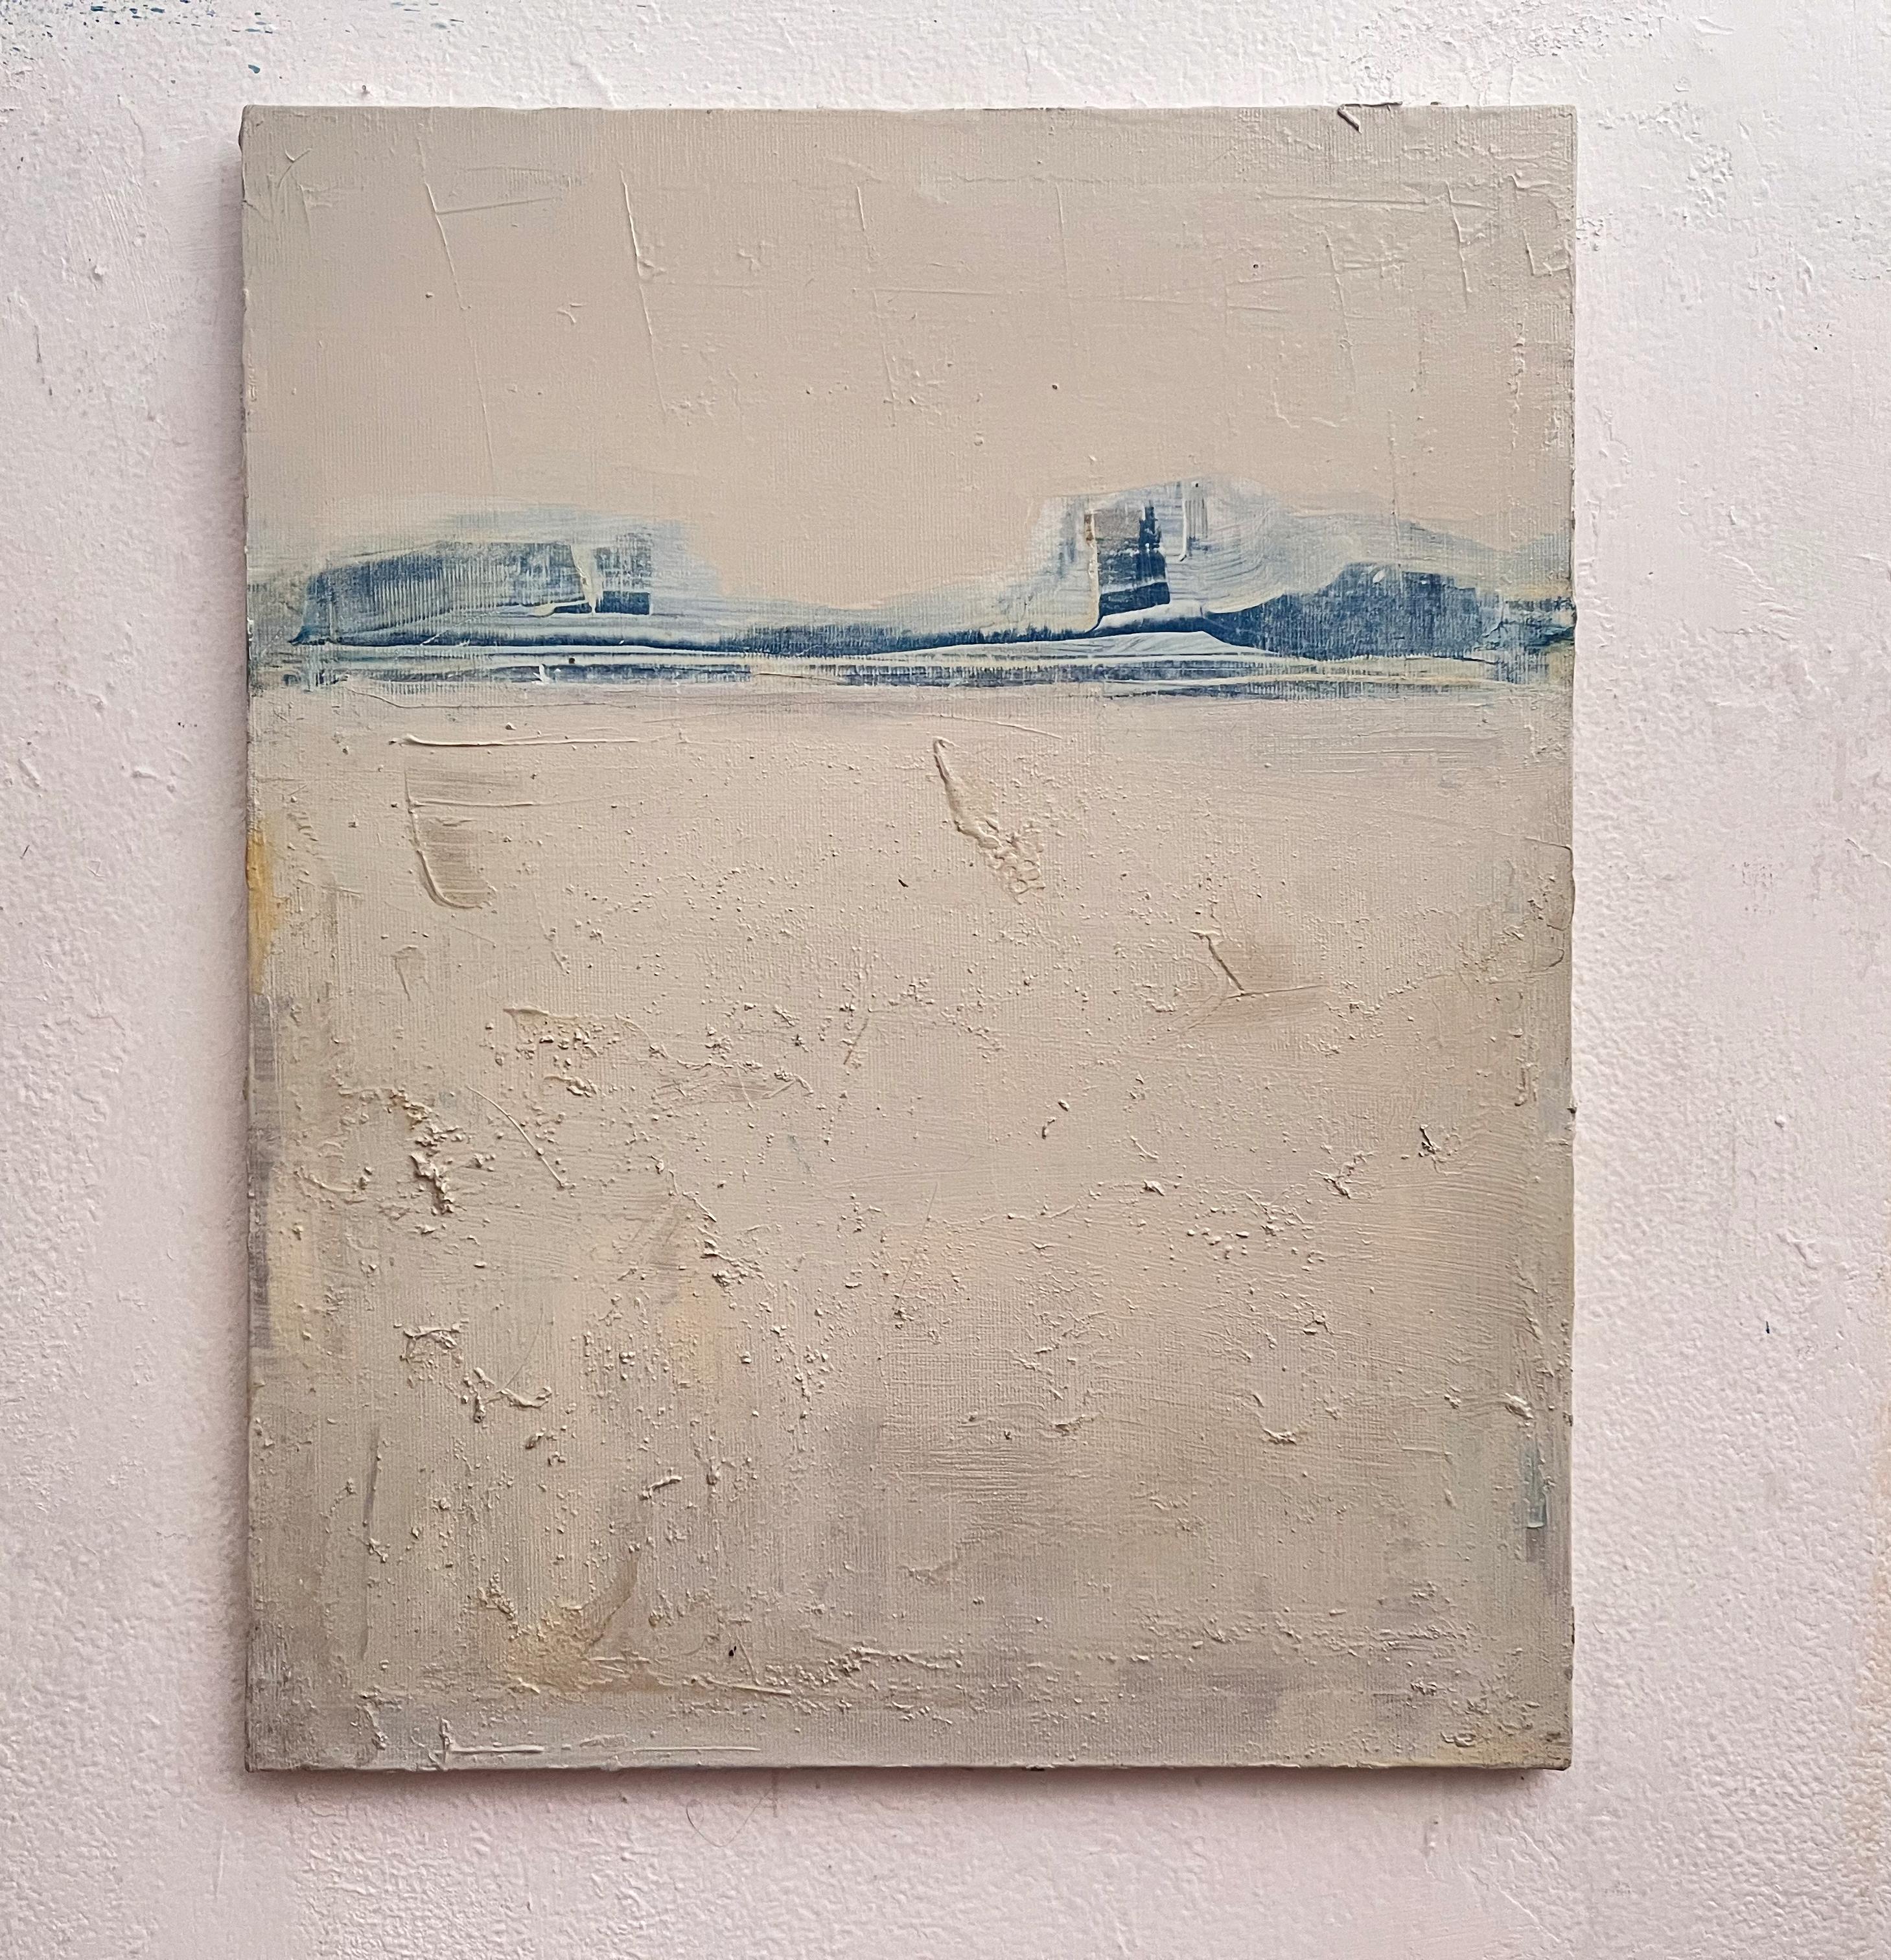 Landscape
mixed media on canvas
40x50 cm
Original Art Ready to hang


Marilina Marchica orients her pictorial research to the theme of subtraction, her attention is focused on the aesthetic and conceptual implications of the trace and the material,